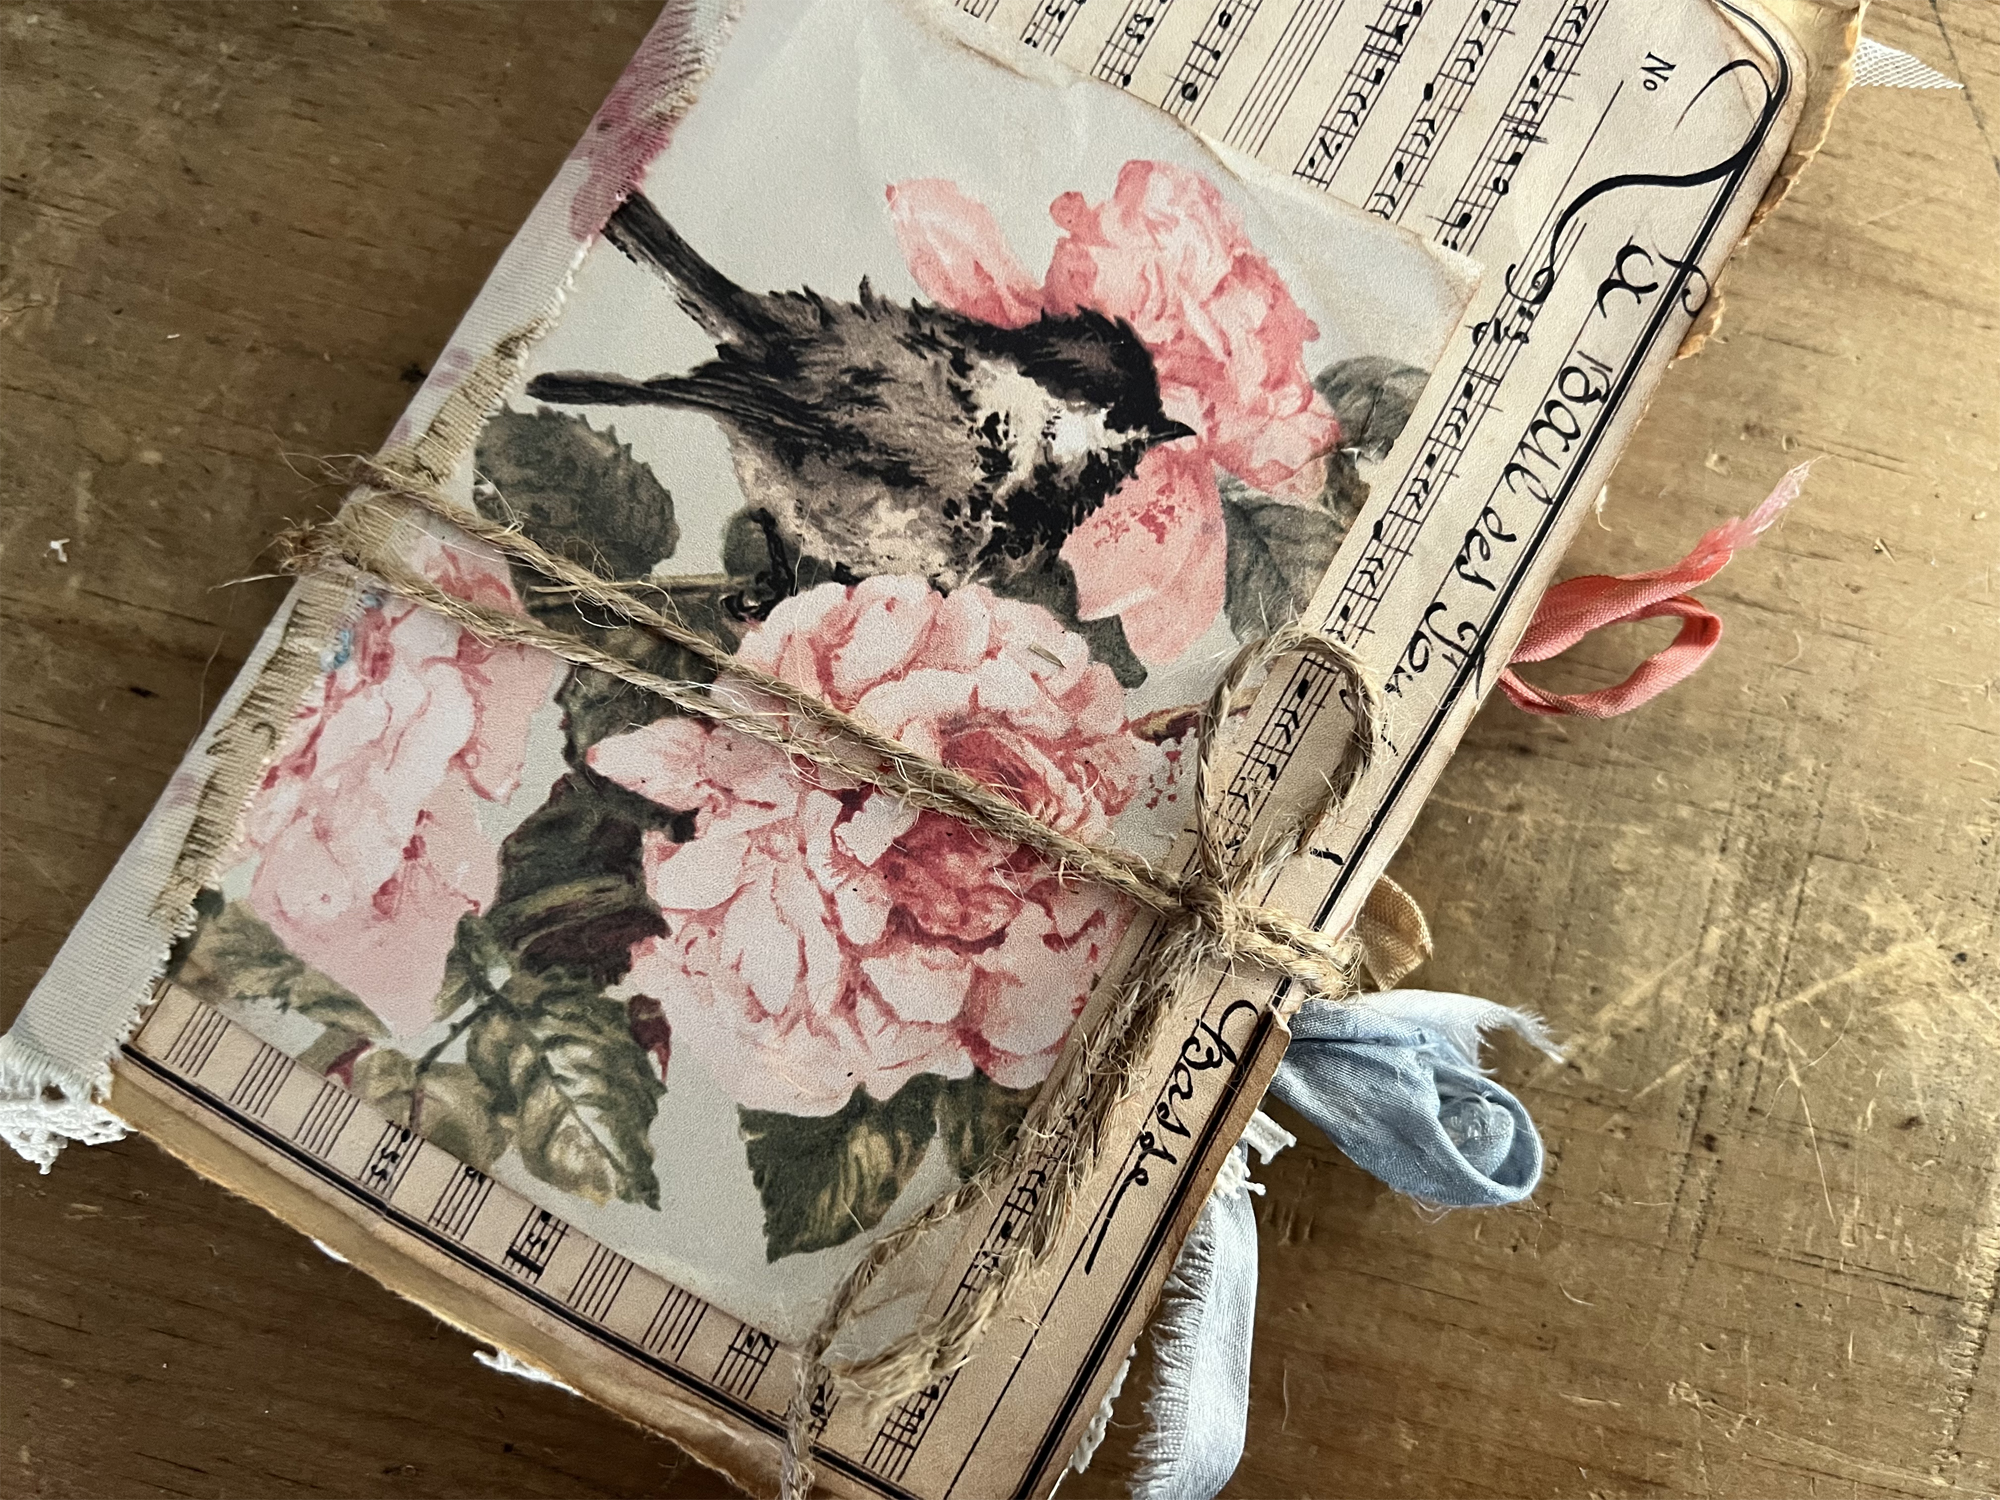 How To Make A Junk Journal Step By Step 